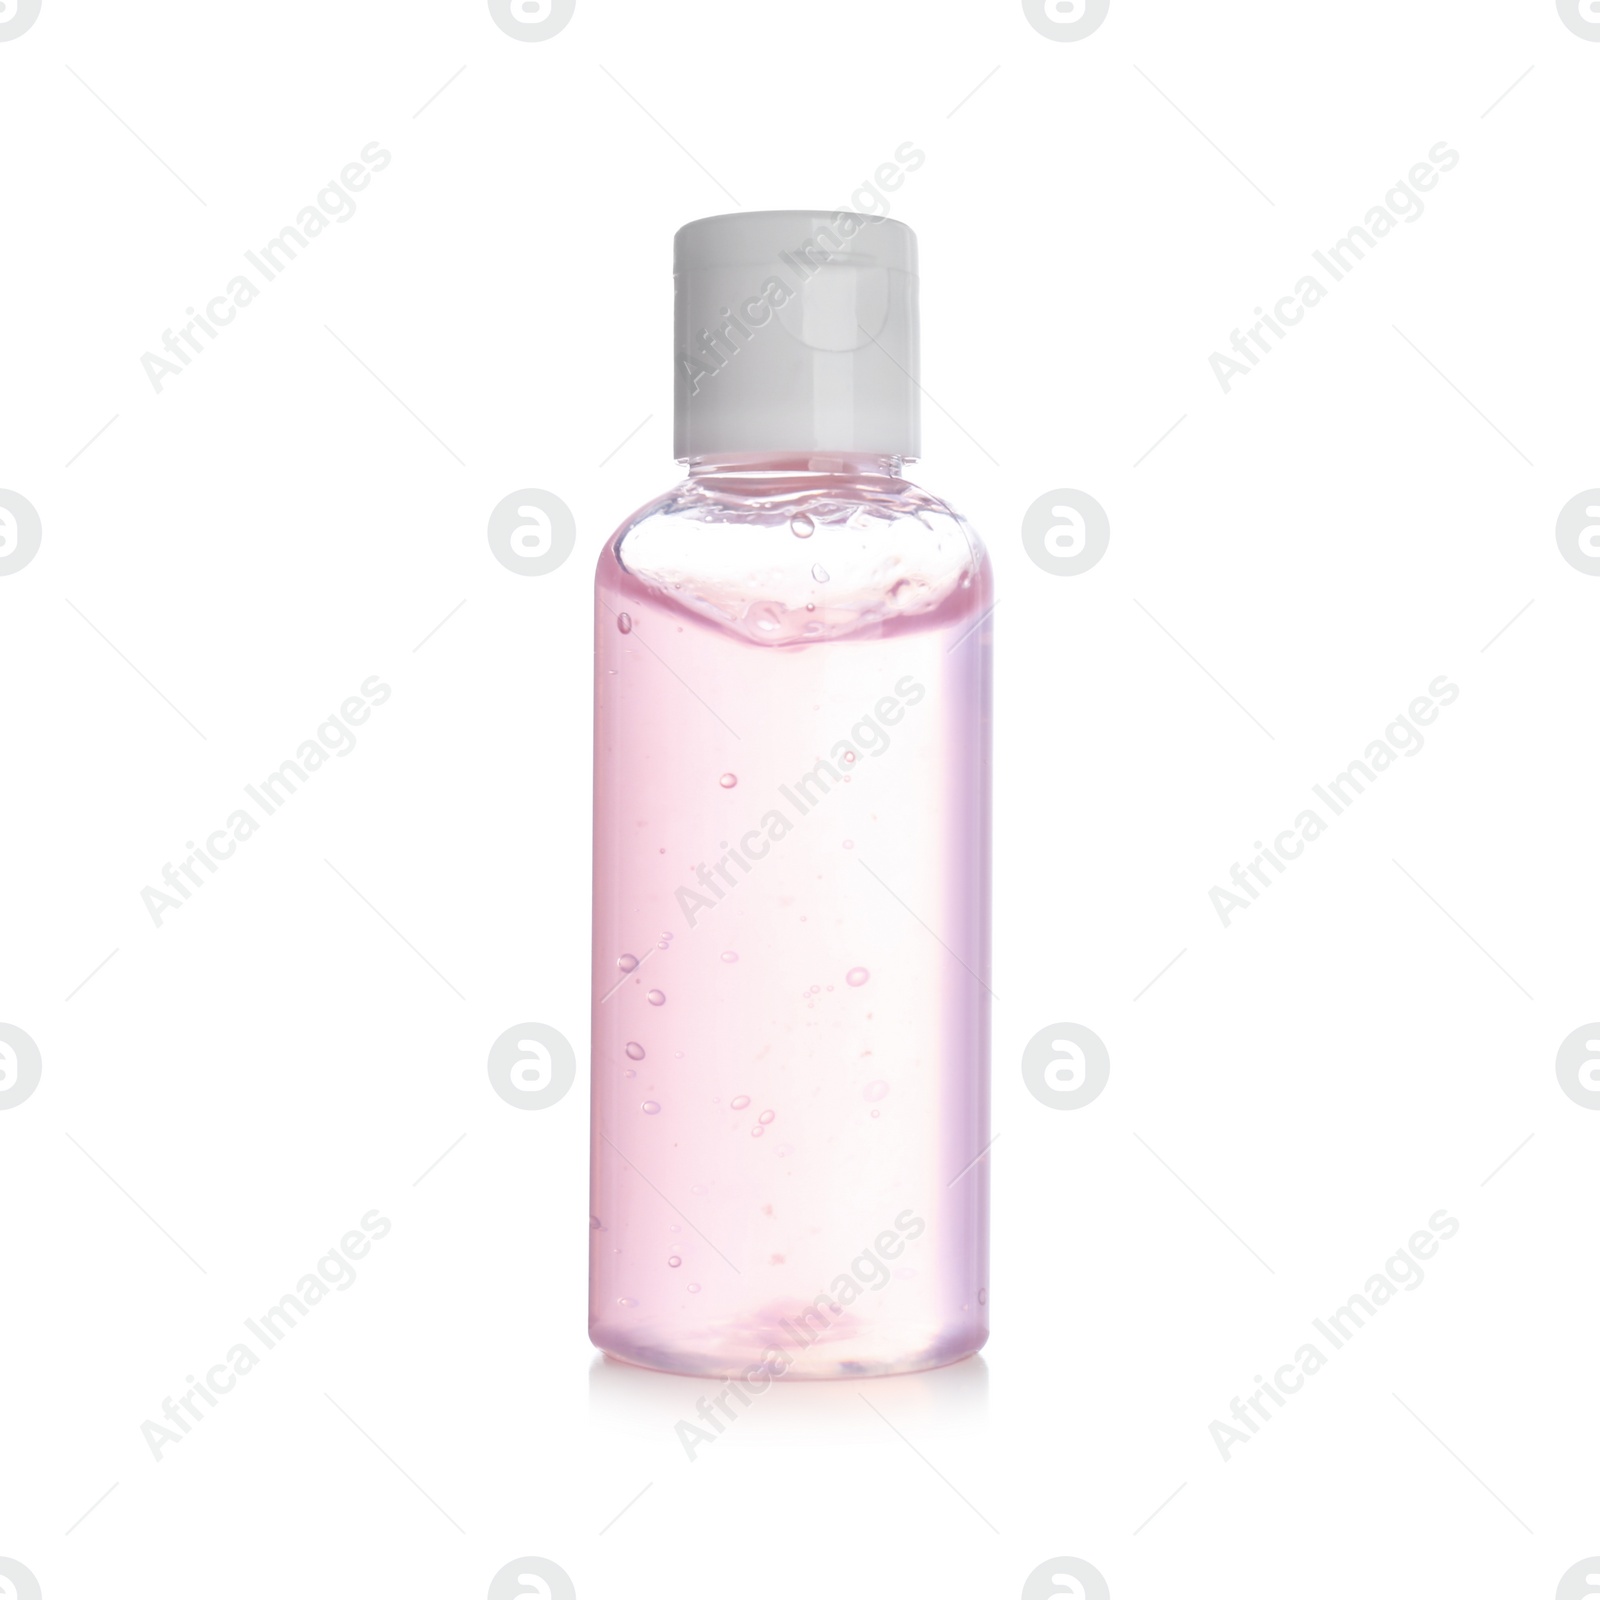 Photo of Bottle of antibacterial hand gel on white background